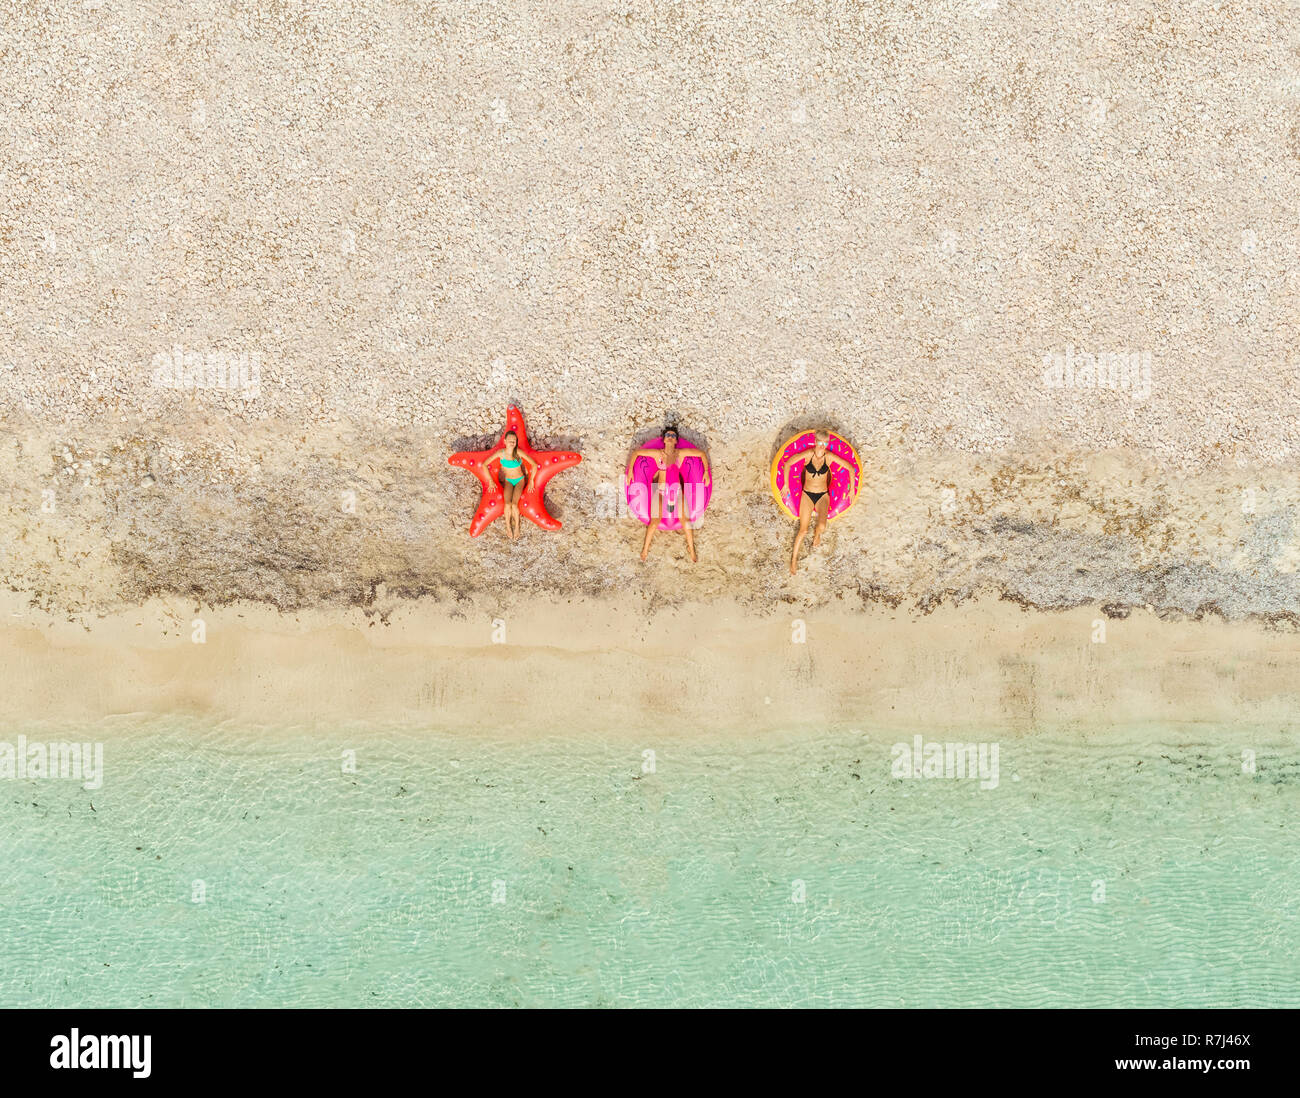 Aerial  view of three women lying on big inflatable star, donut, flamingo shaped mattresses on beach. Stock Photo